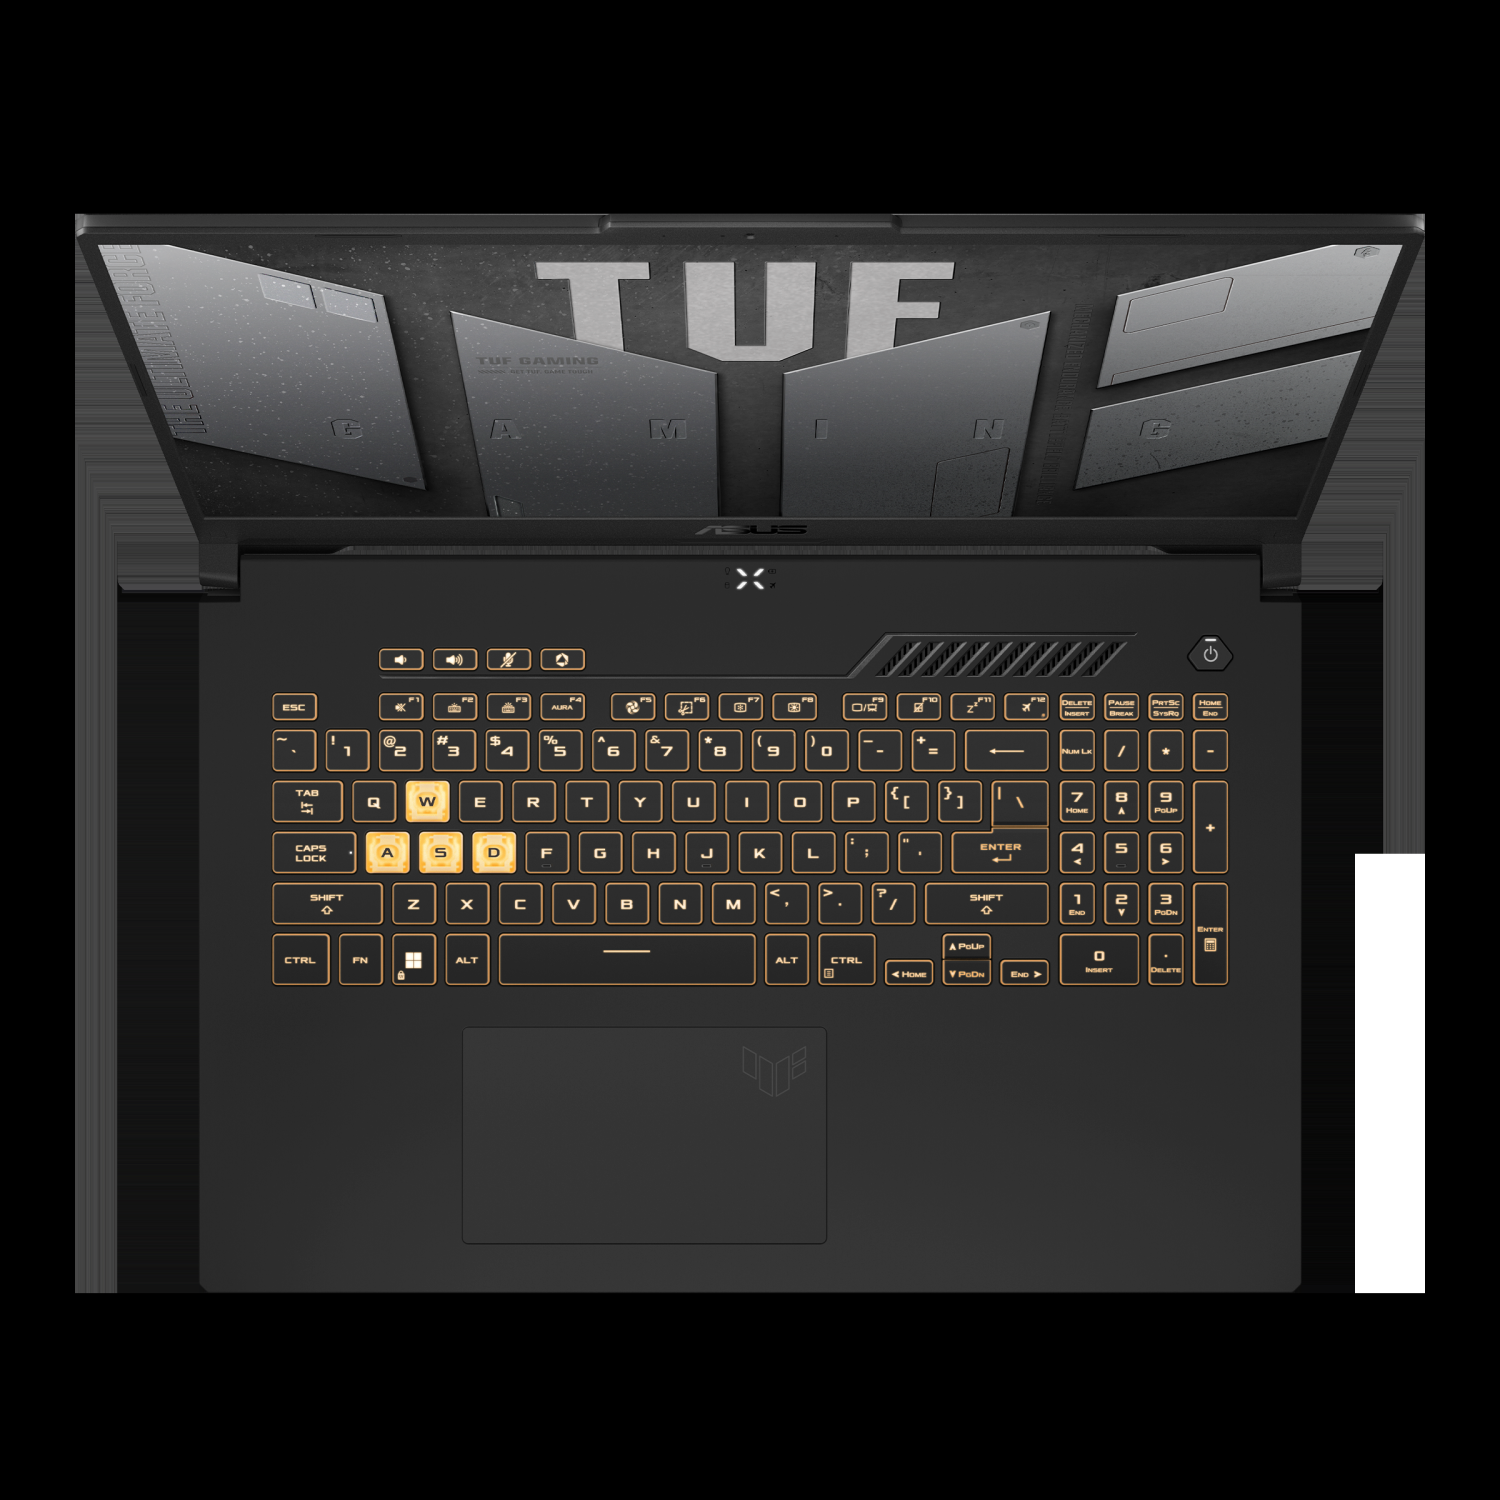 NEW - ASUS TUF Gaming F17 17.3" Gaming Laptop, Intel Core i7-11800H, 16GB RAM, 512GB SSD, NVIDIA GeForce RTX 3050 4GB, Windwos 10 Home (Win. 11 Ready)